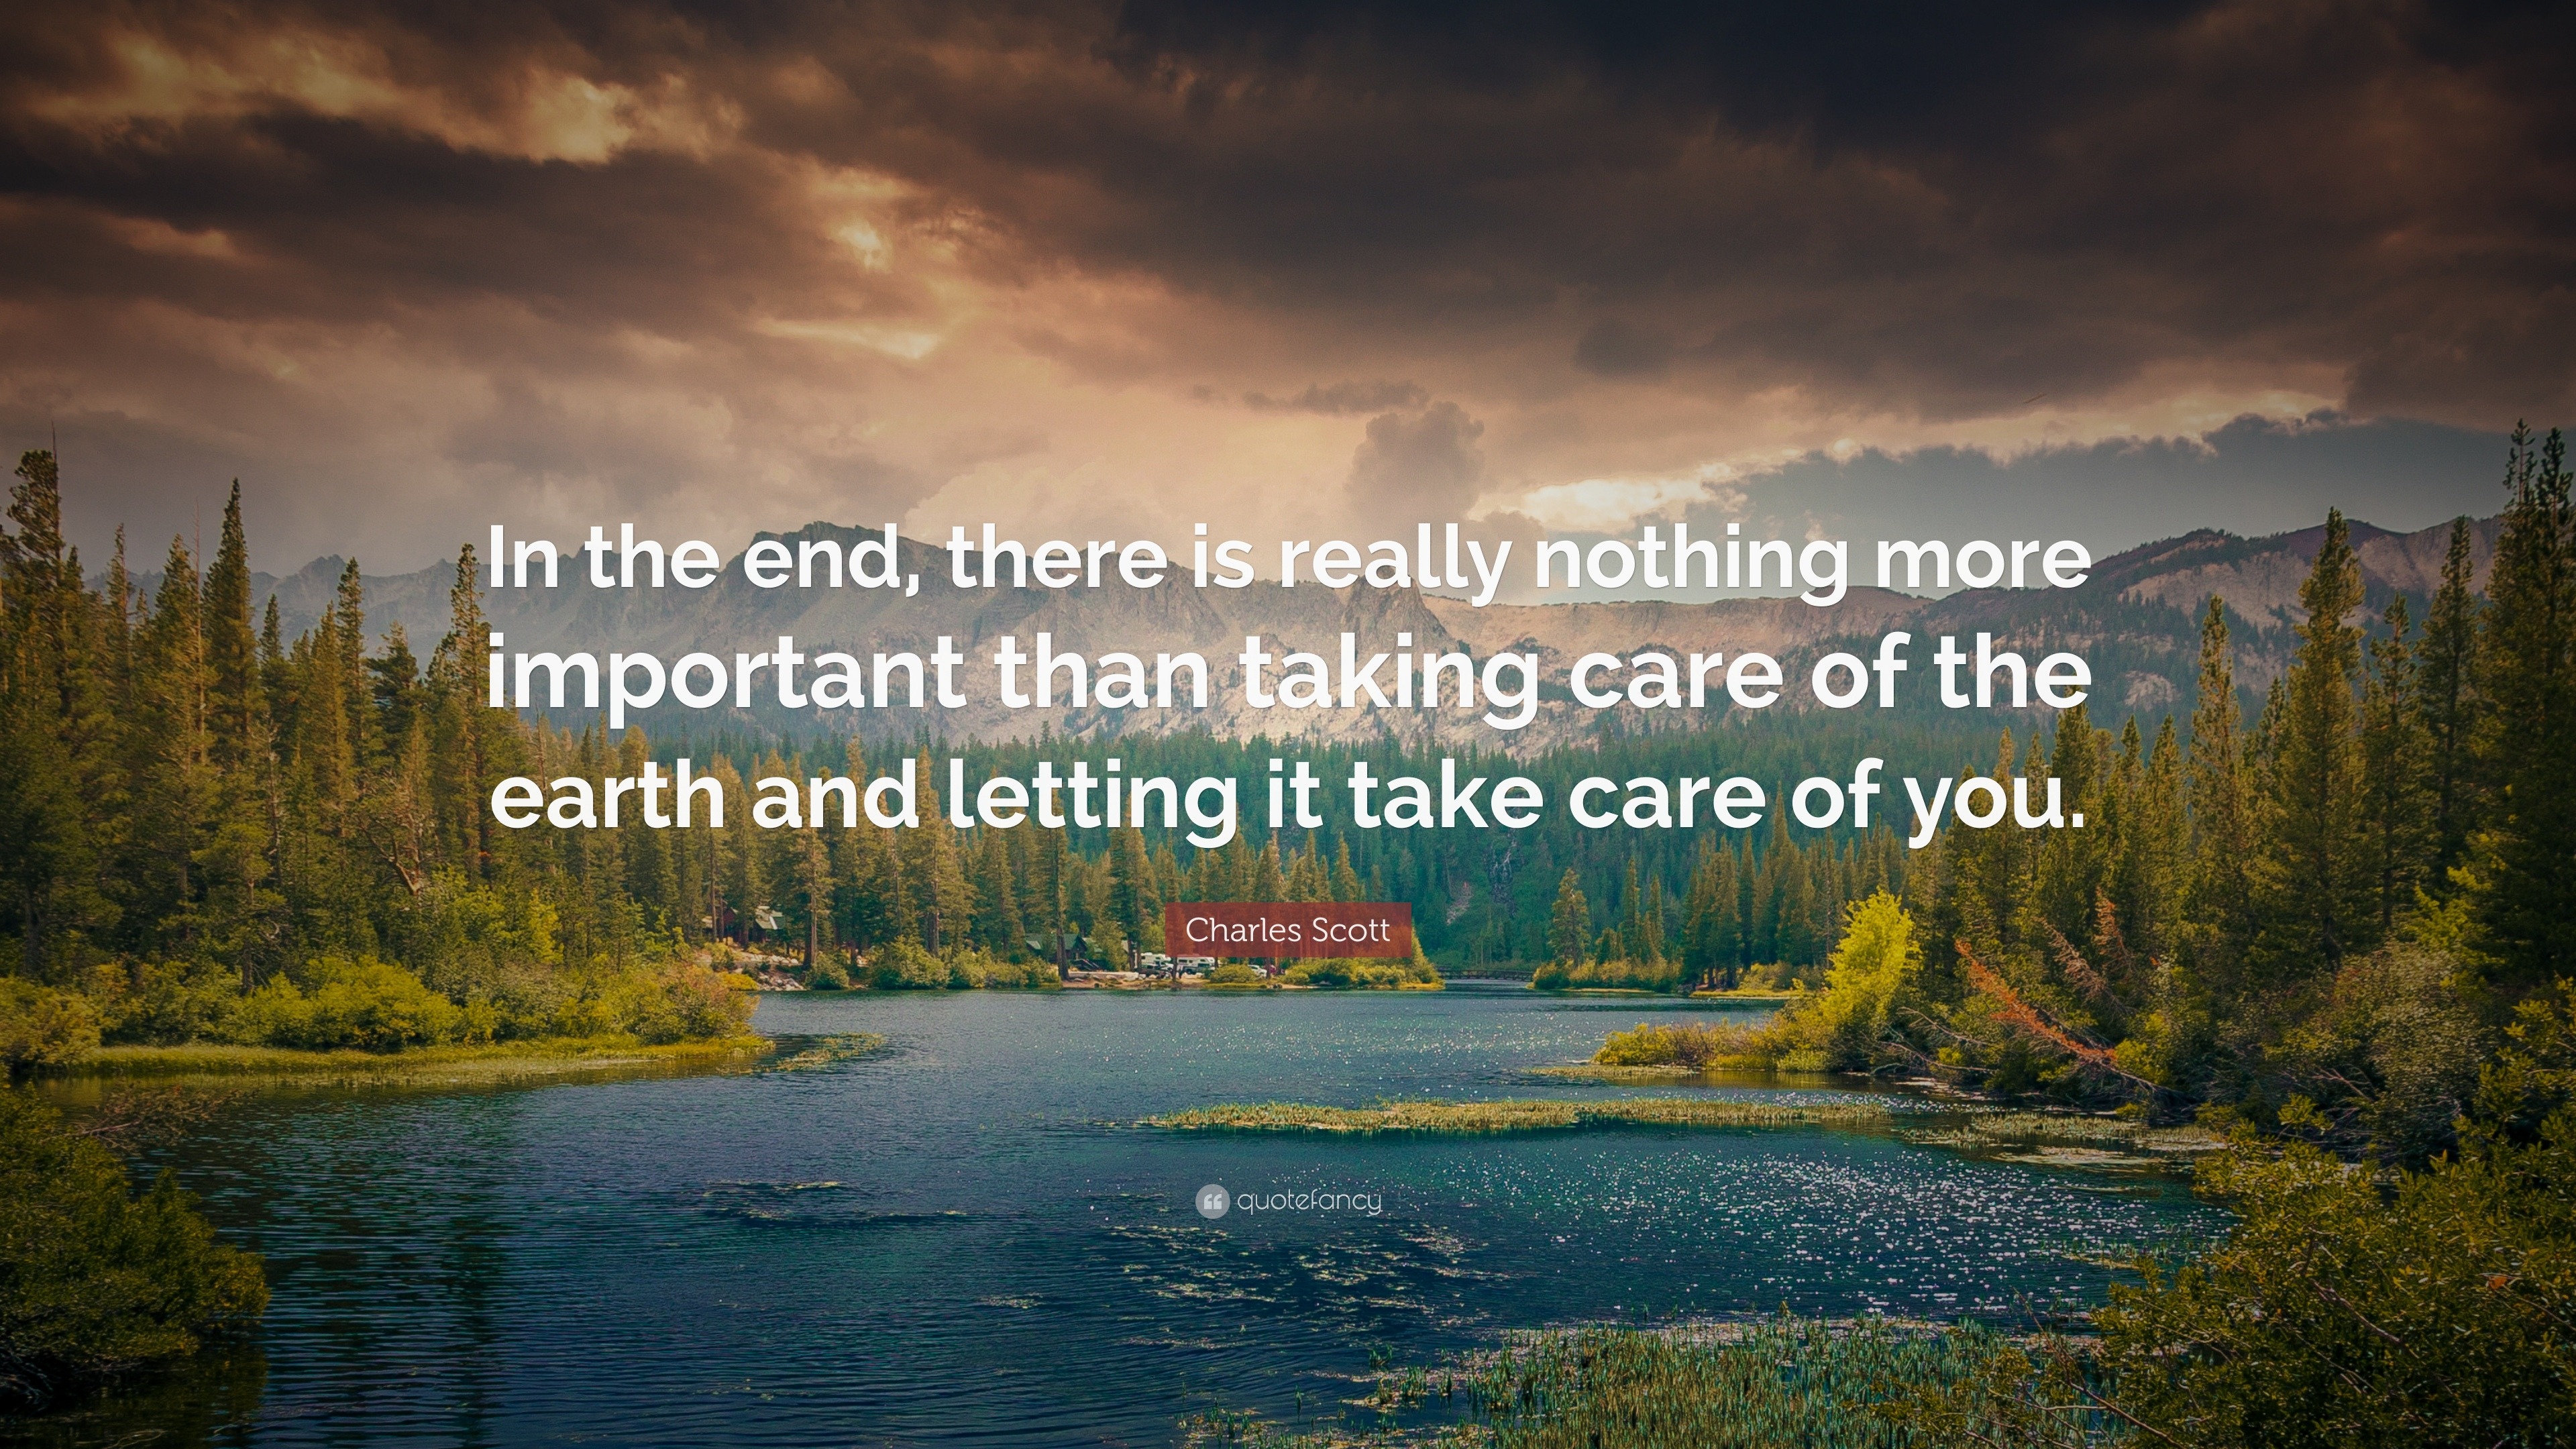 Charles Scott Quote: “In The End, There Is Really Nothing More Important Than Taking Care Of